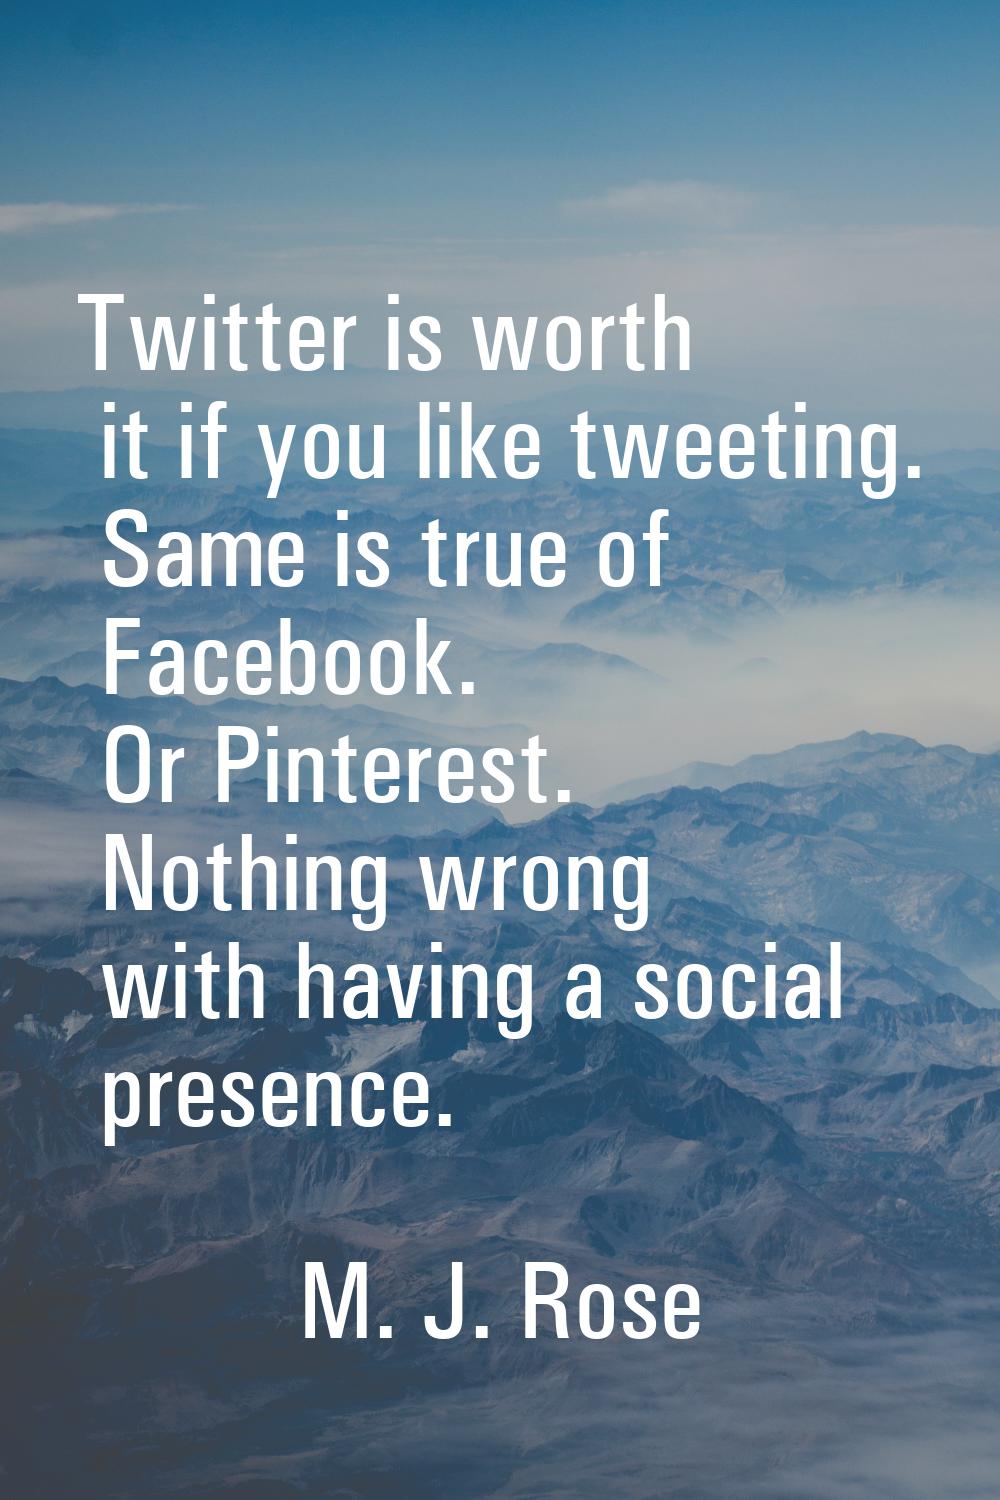 Twitter is worth it if you like tweeting. Same is true of Facebook. Or Pinterest. Nothing wrong wit